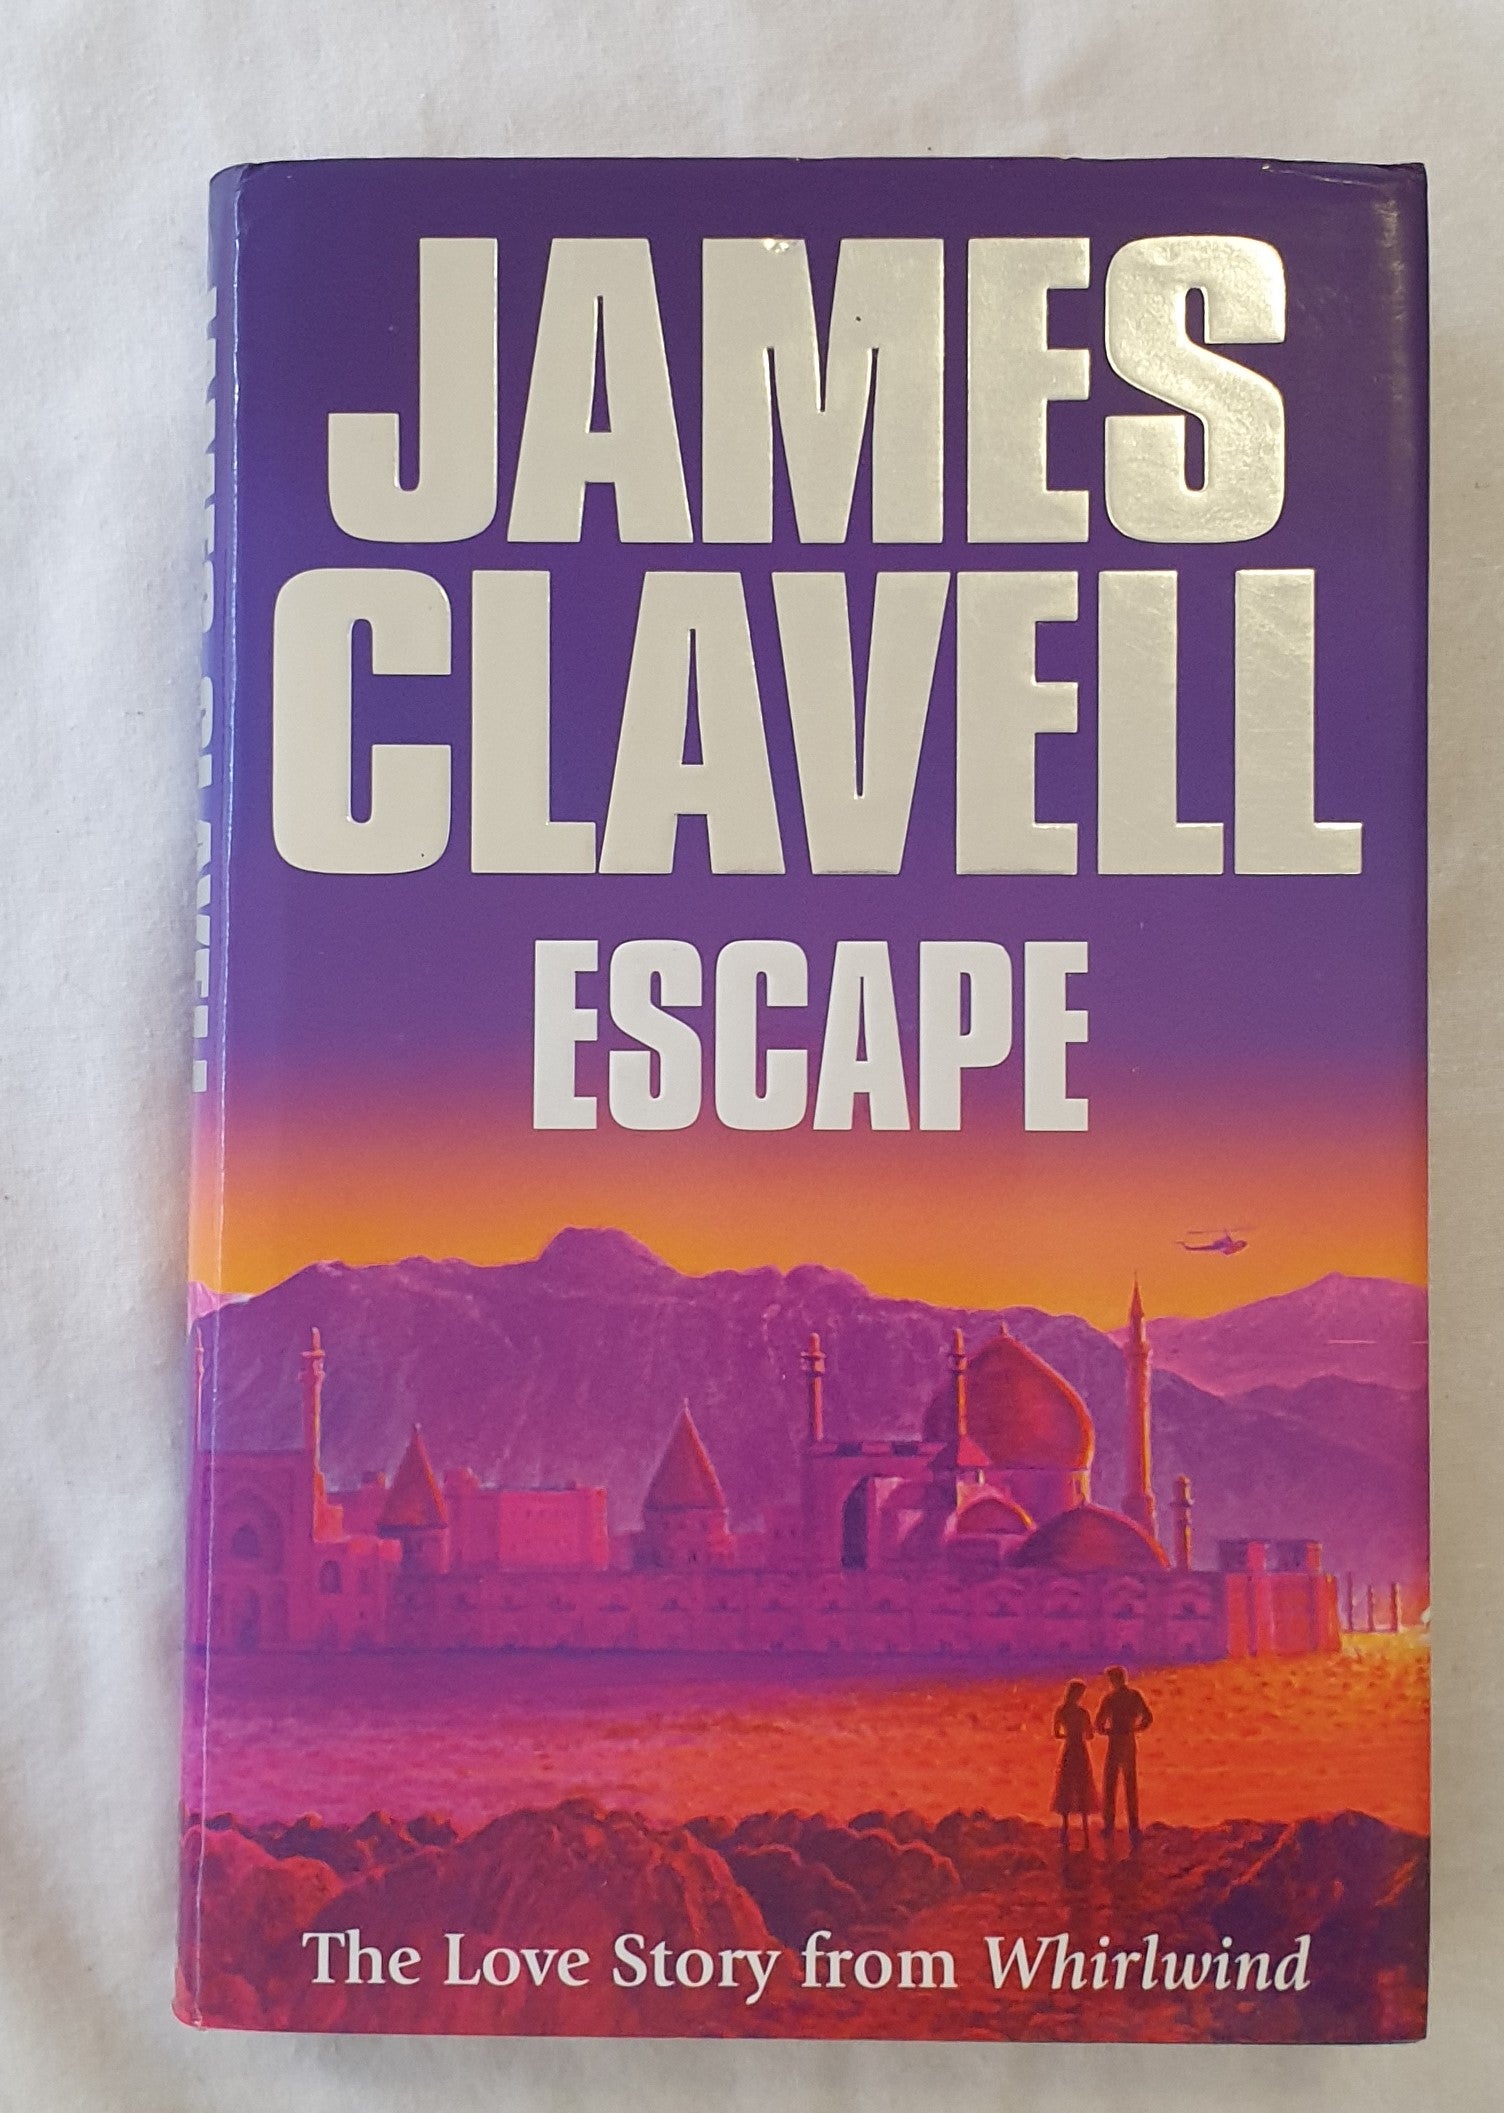 Escape by James Clavell